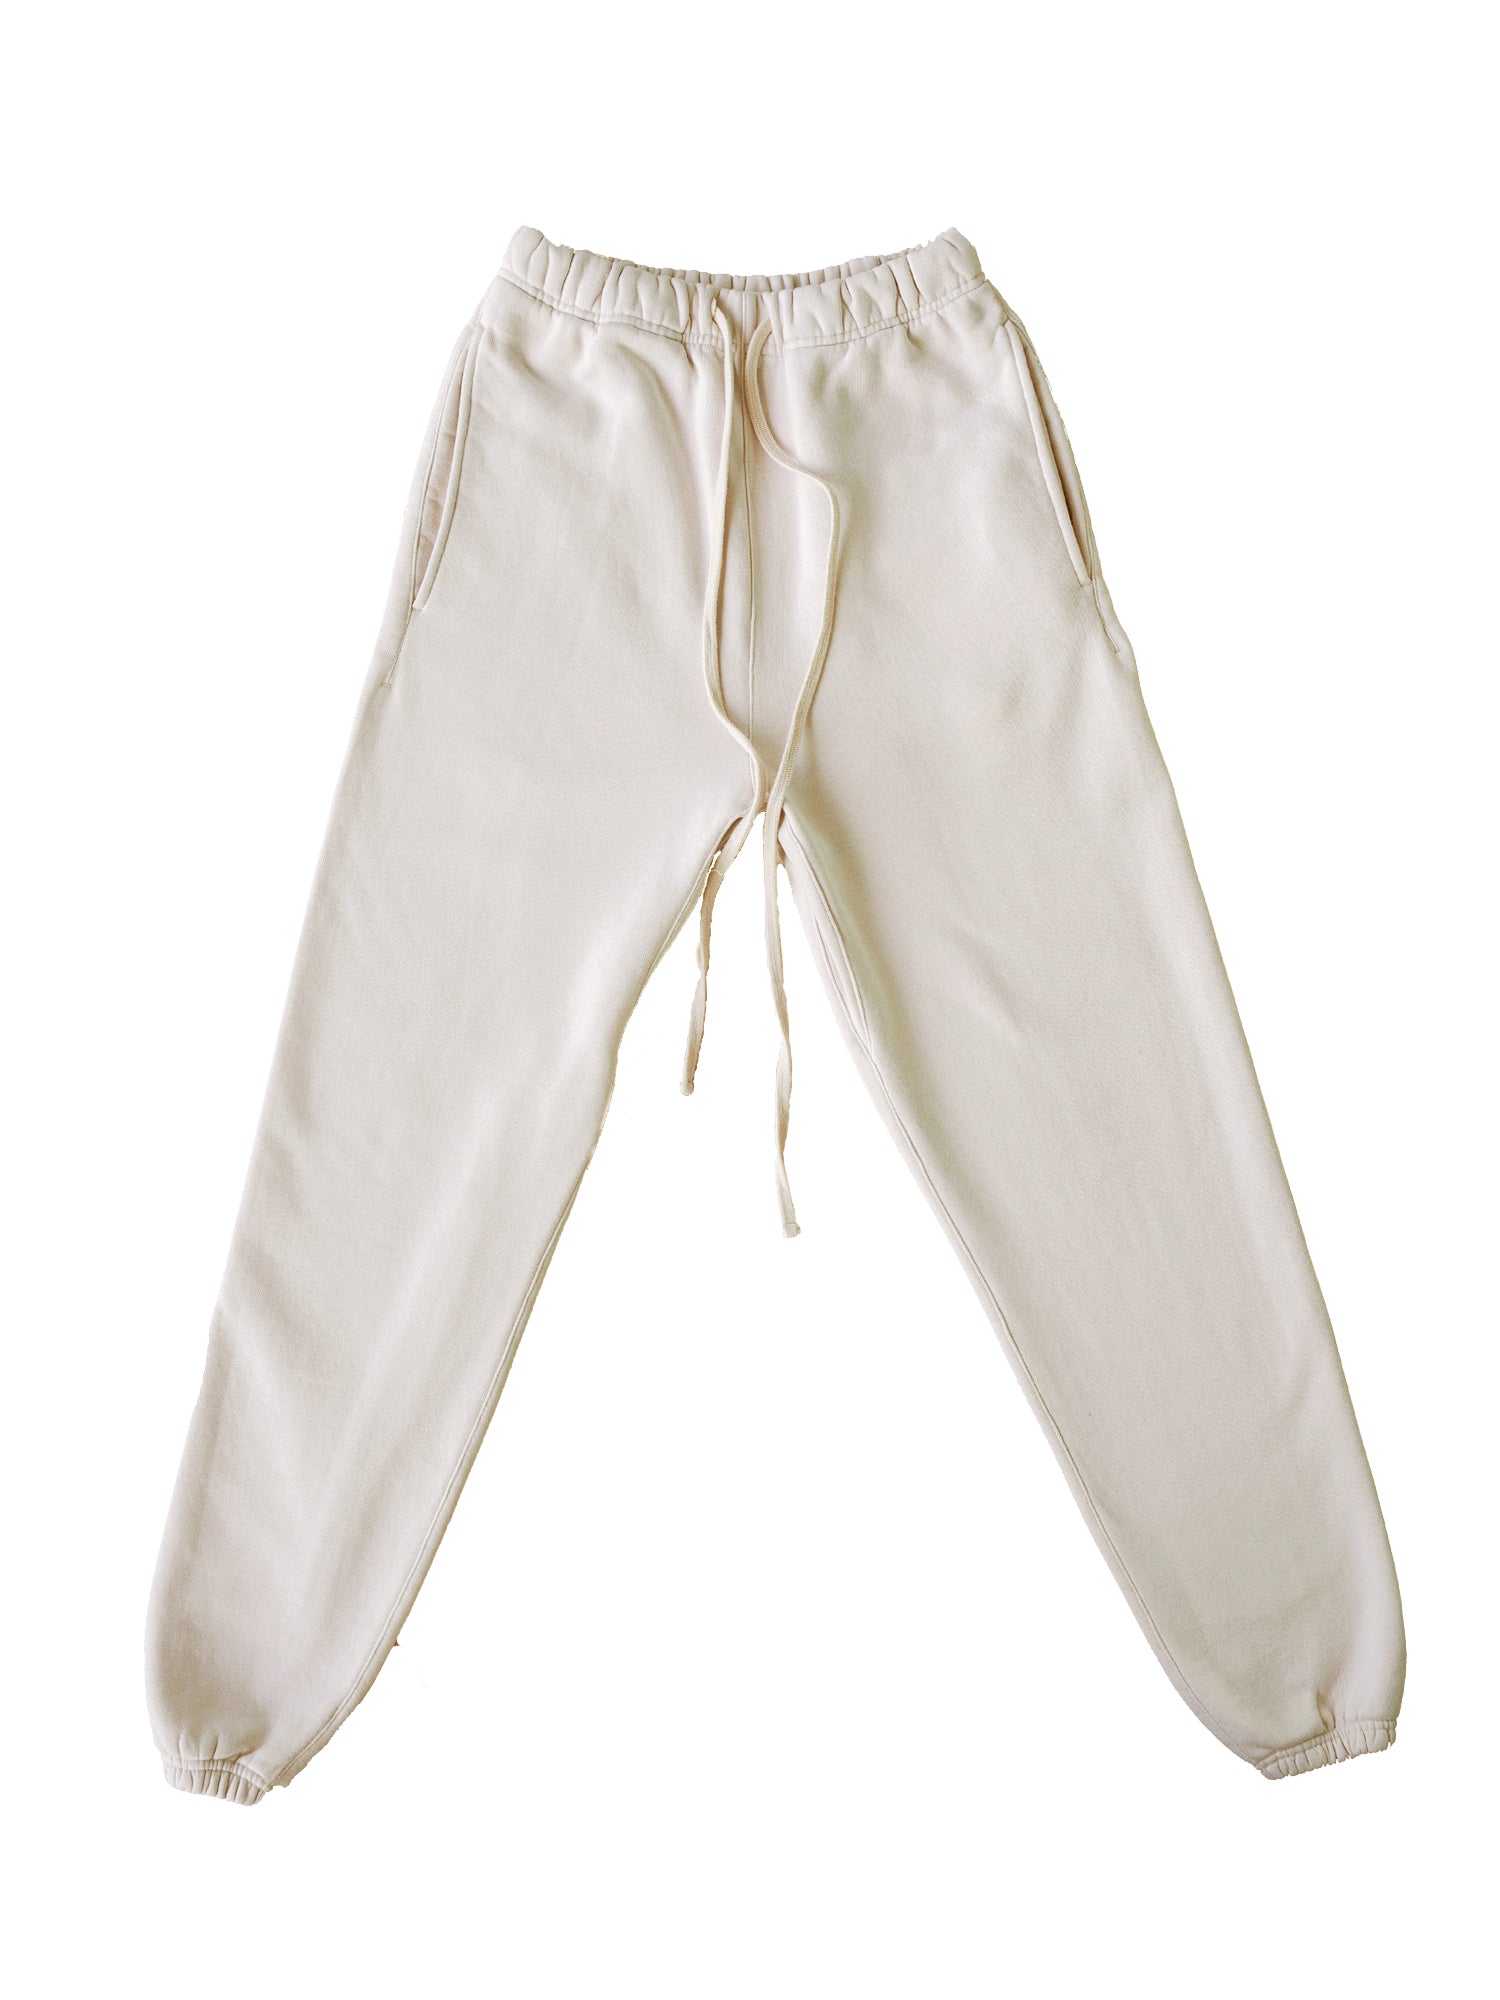 Heria Everyday Relaxed Fit Joggers - Cream (6931882410026)